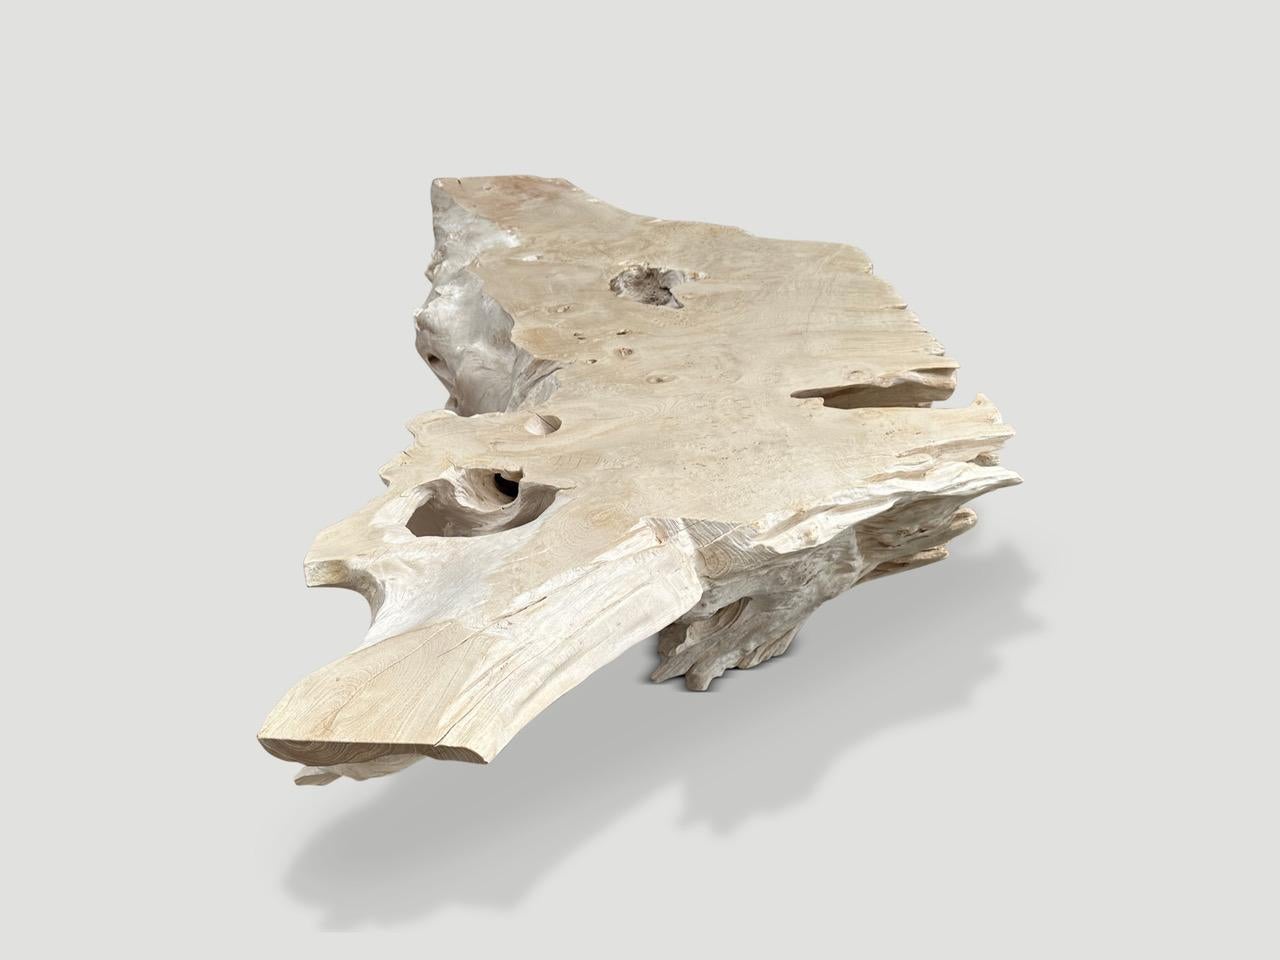 Impressive single teak root coffee table. The aged teak wood has been bleached and a polish has been added to the top for protection. On one side of this 100 year old root, a beautiful natural erosion has formed with fossilized details. A unique